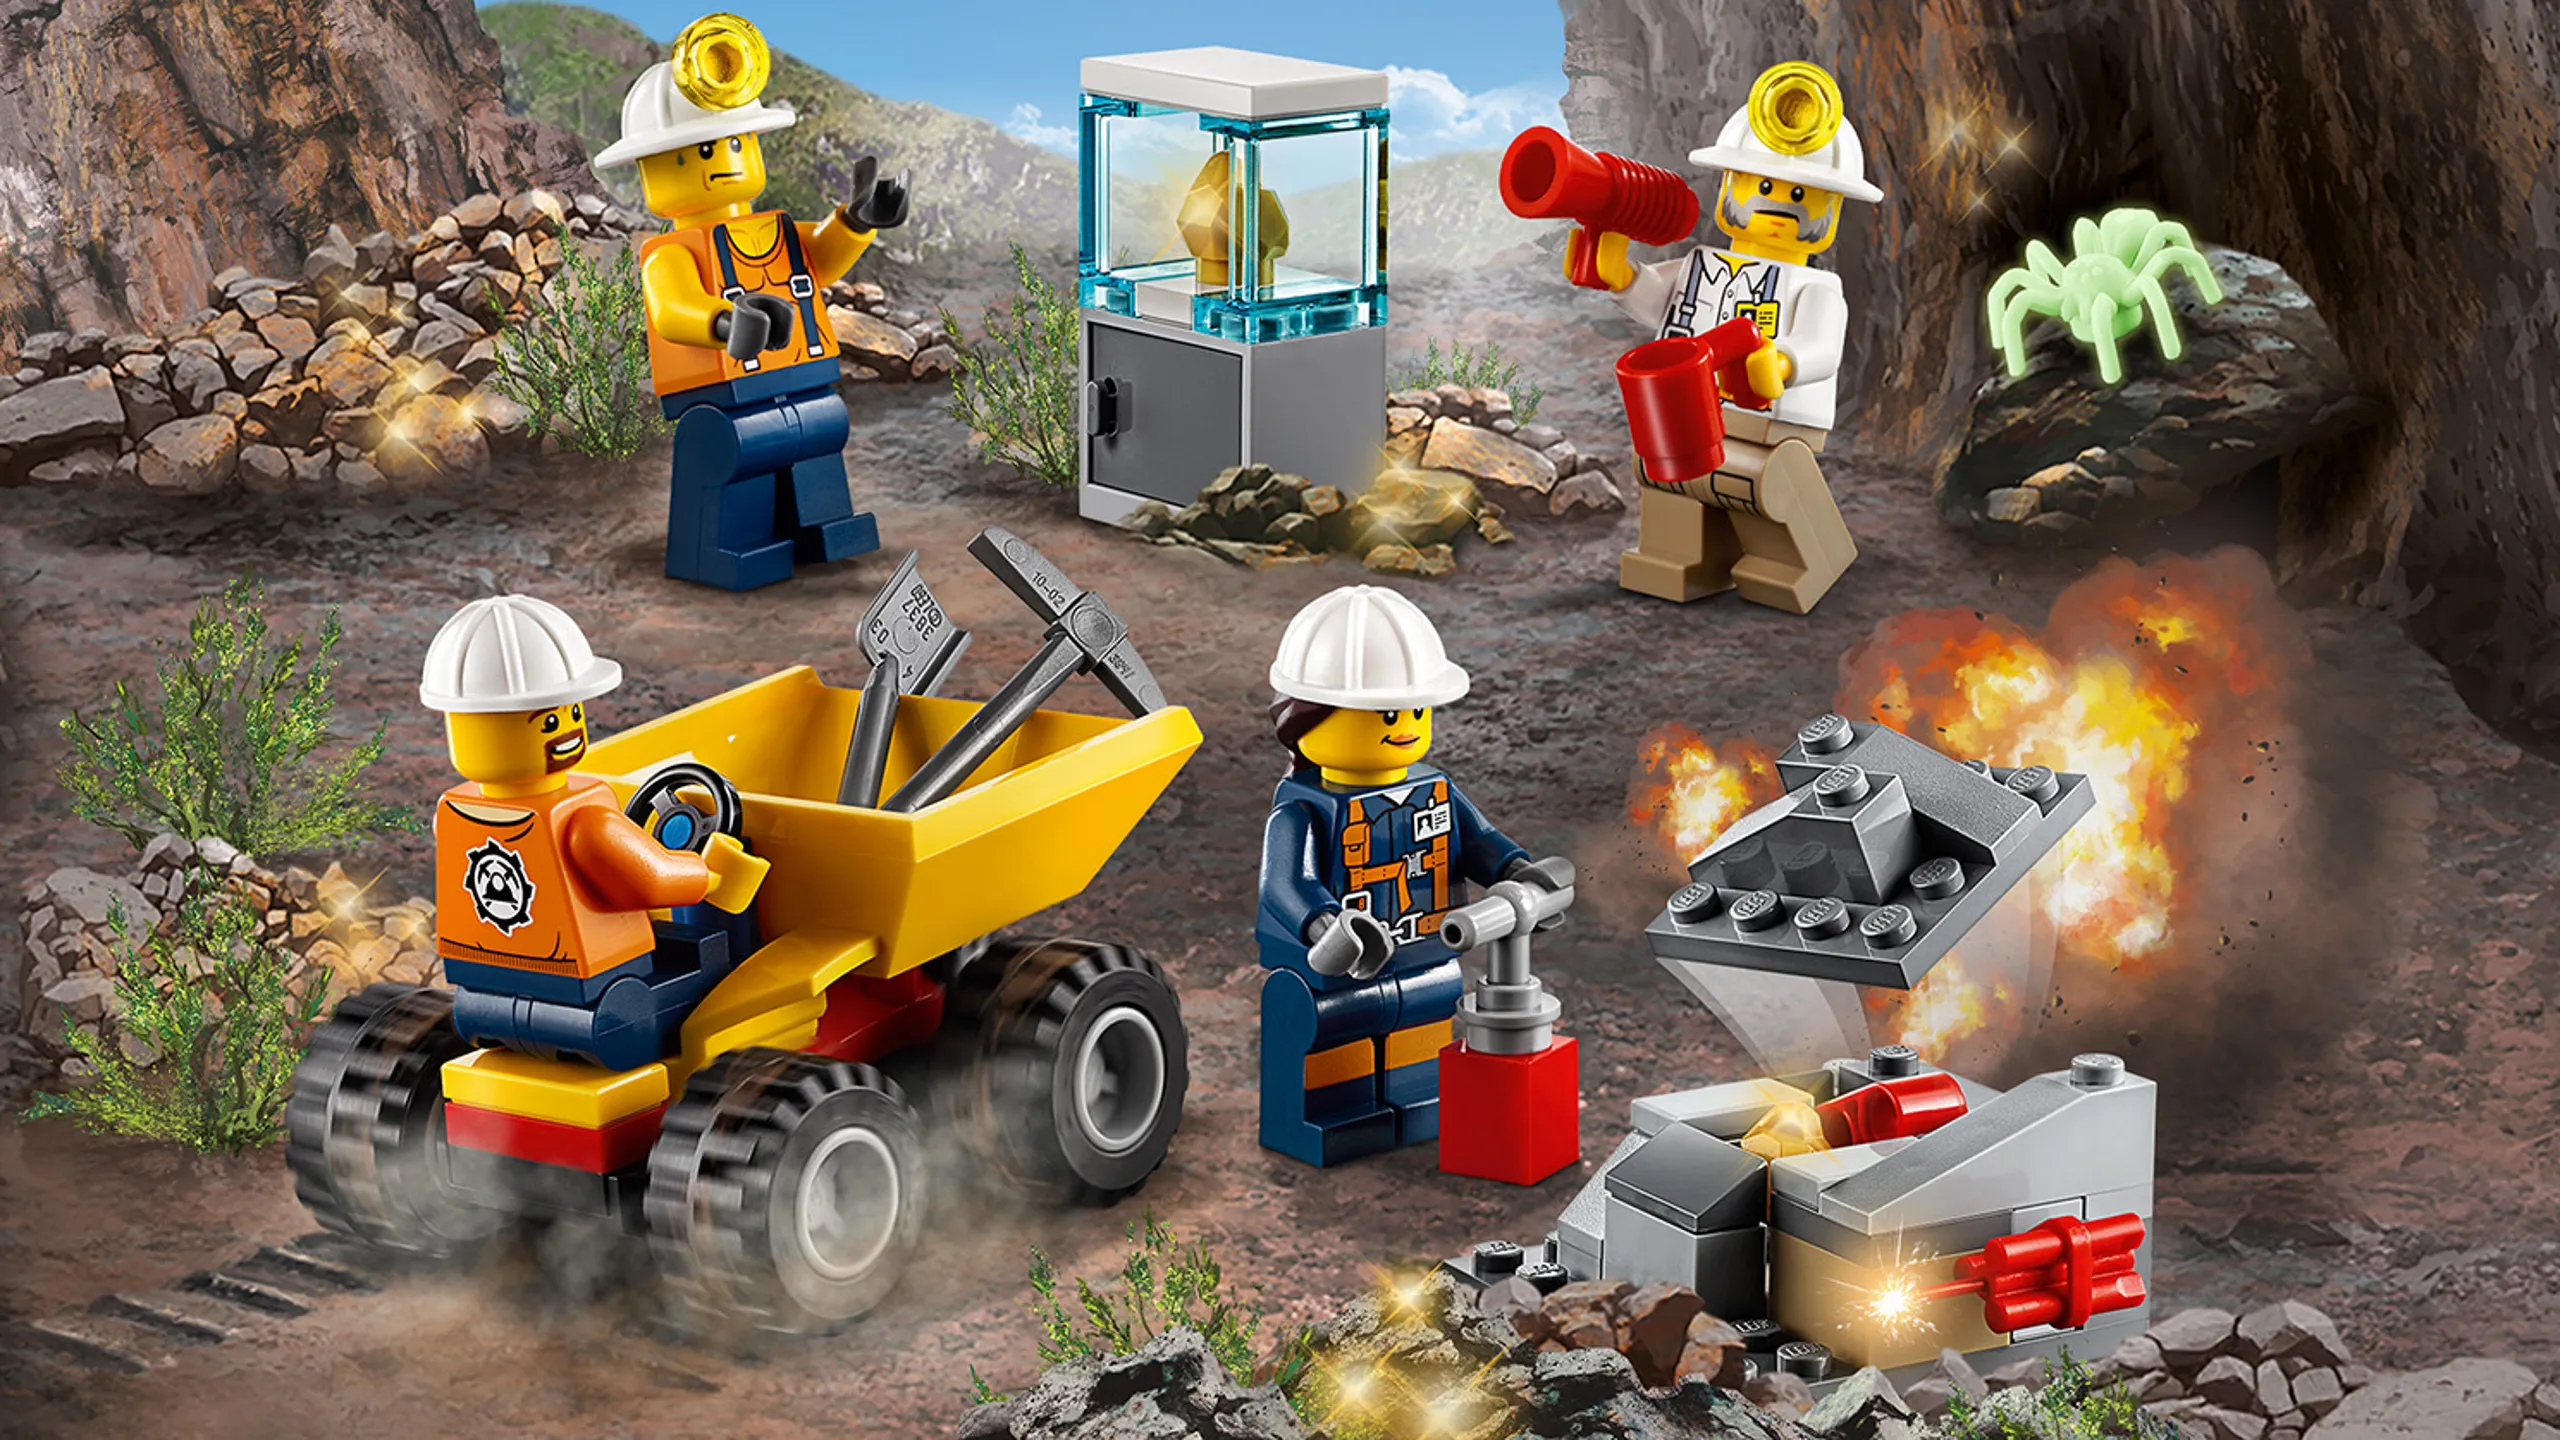 LEGO City Mining - 60148 Mining Team - The workers makes explosions and uses their tools and wheelbarrows to clean up.